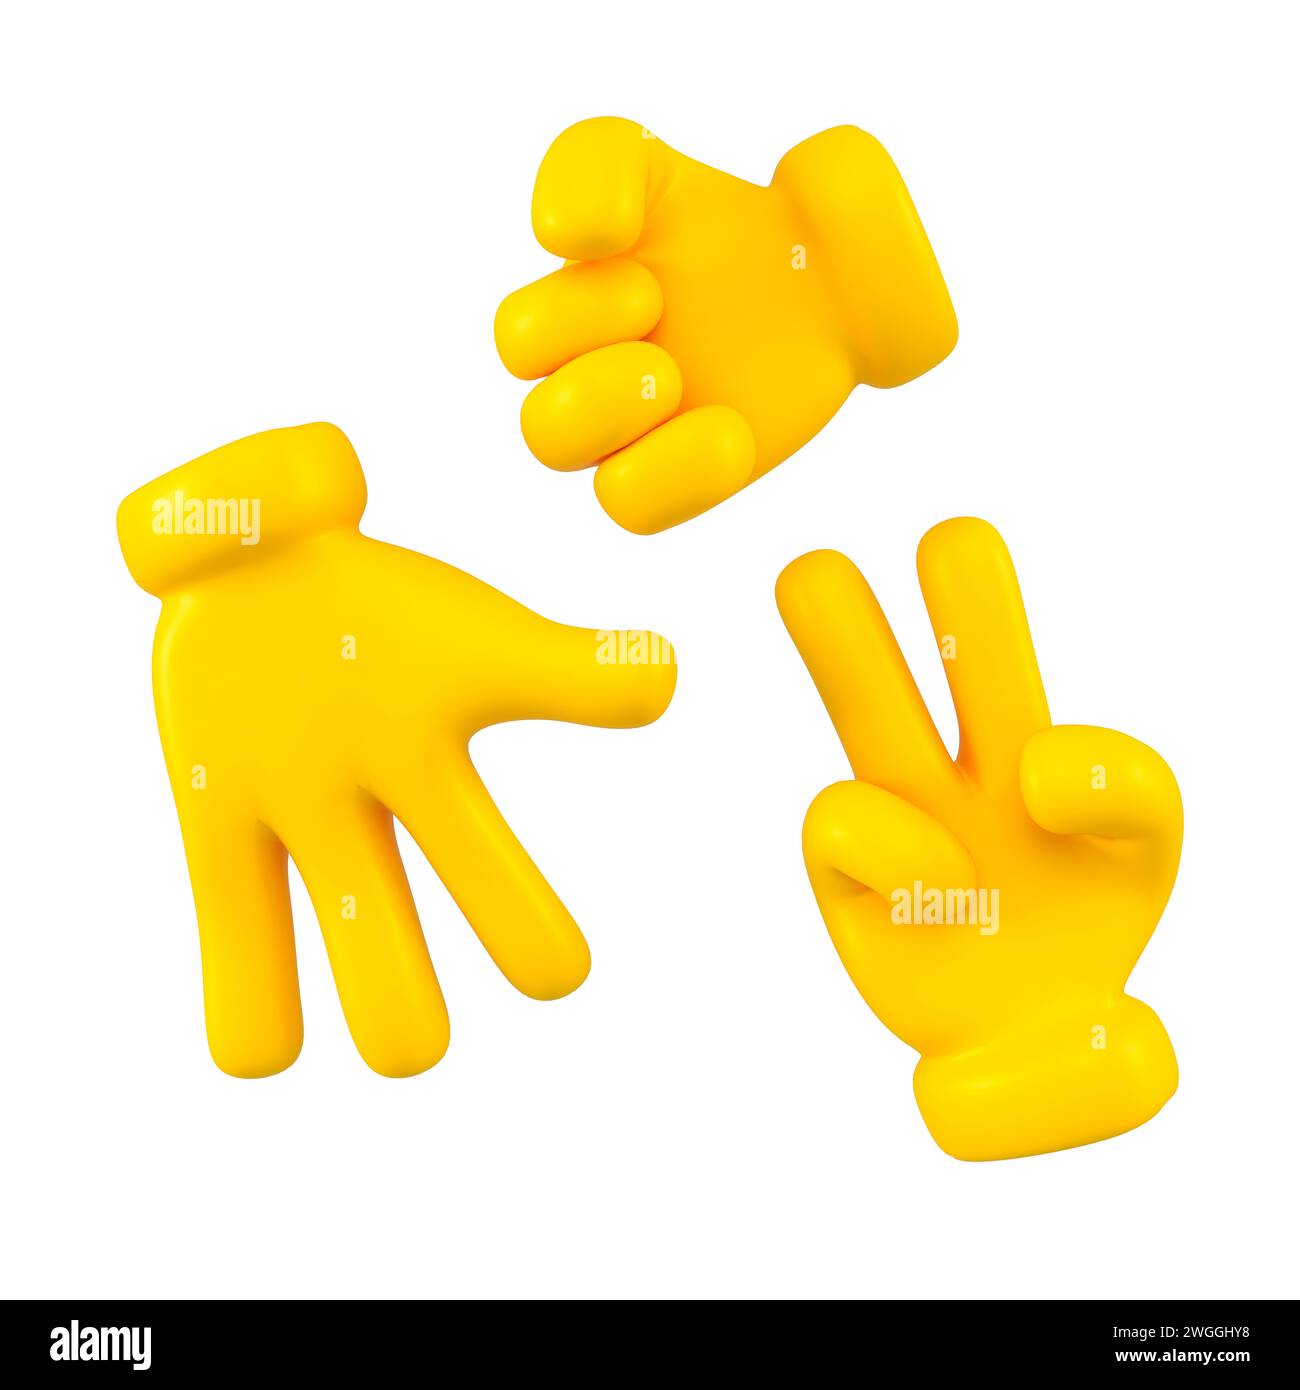 Yellow emoji hands play rock paper scissors game isolated. Showing of gestures symbol , icon and sign concept. 3d rendering. Stock Photo